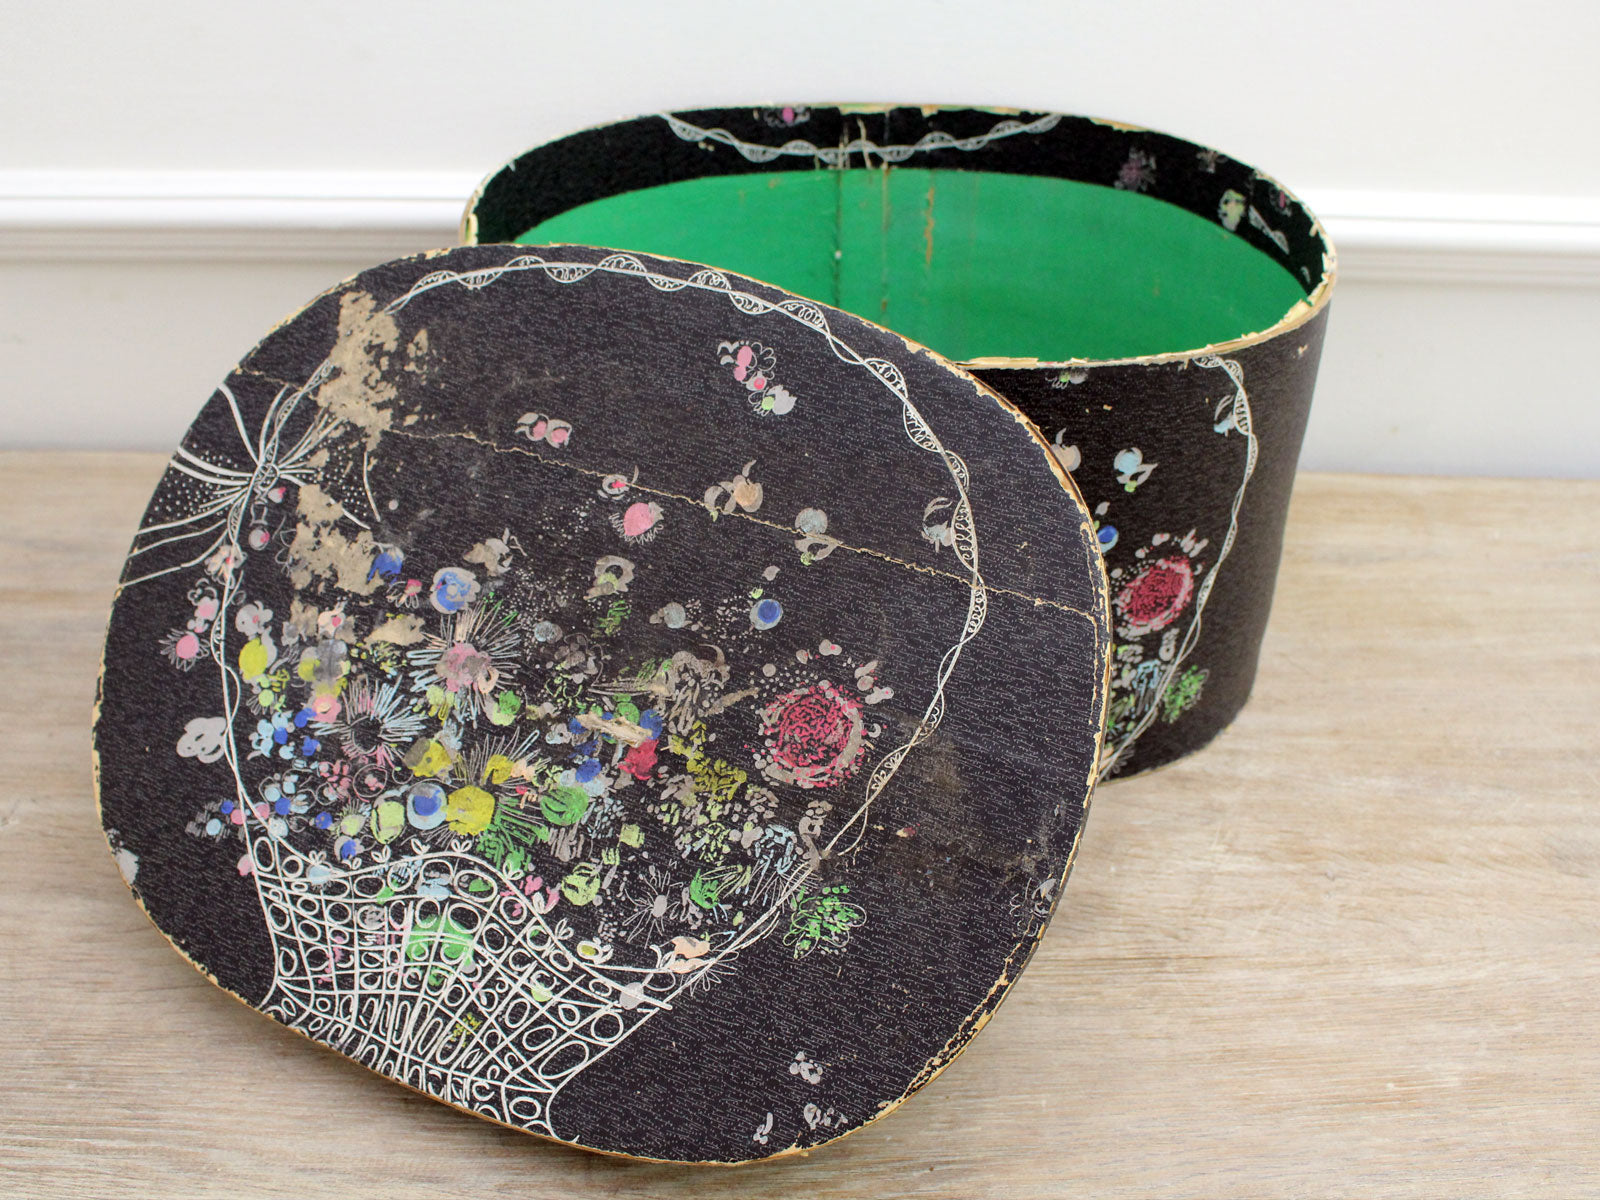 Antique 1900/1920 old French cardboard hat box covered with floral